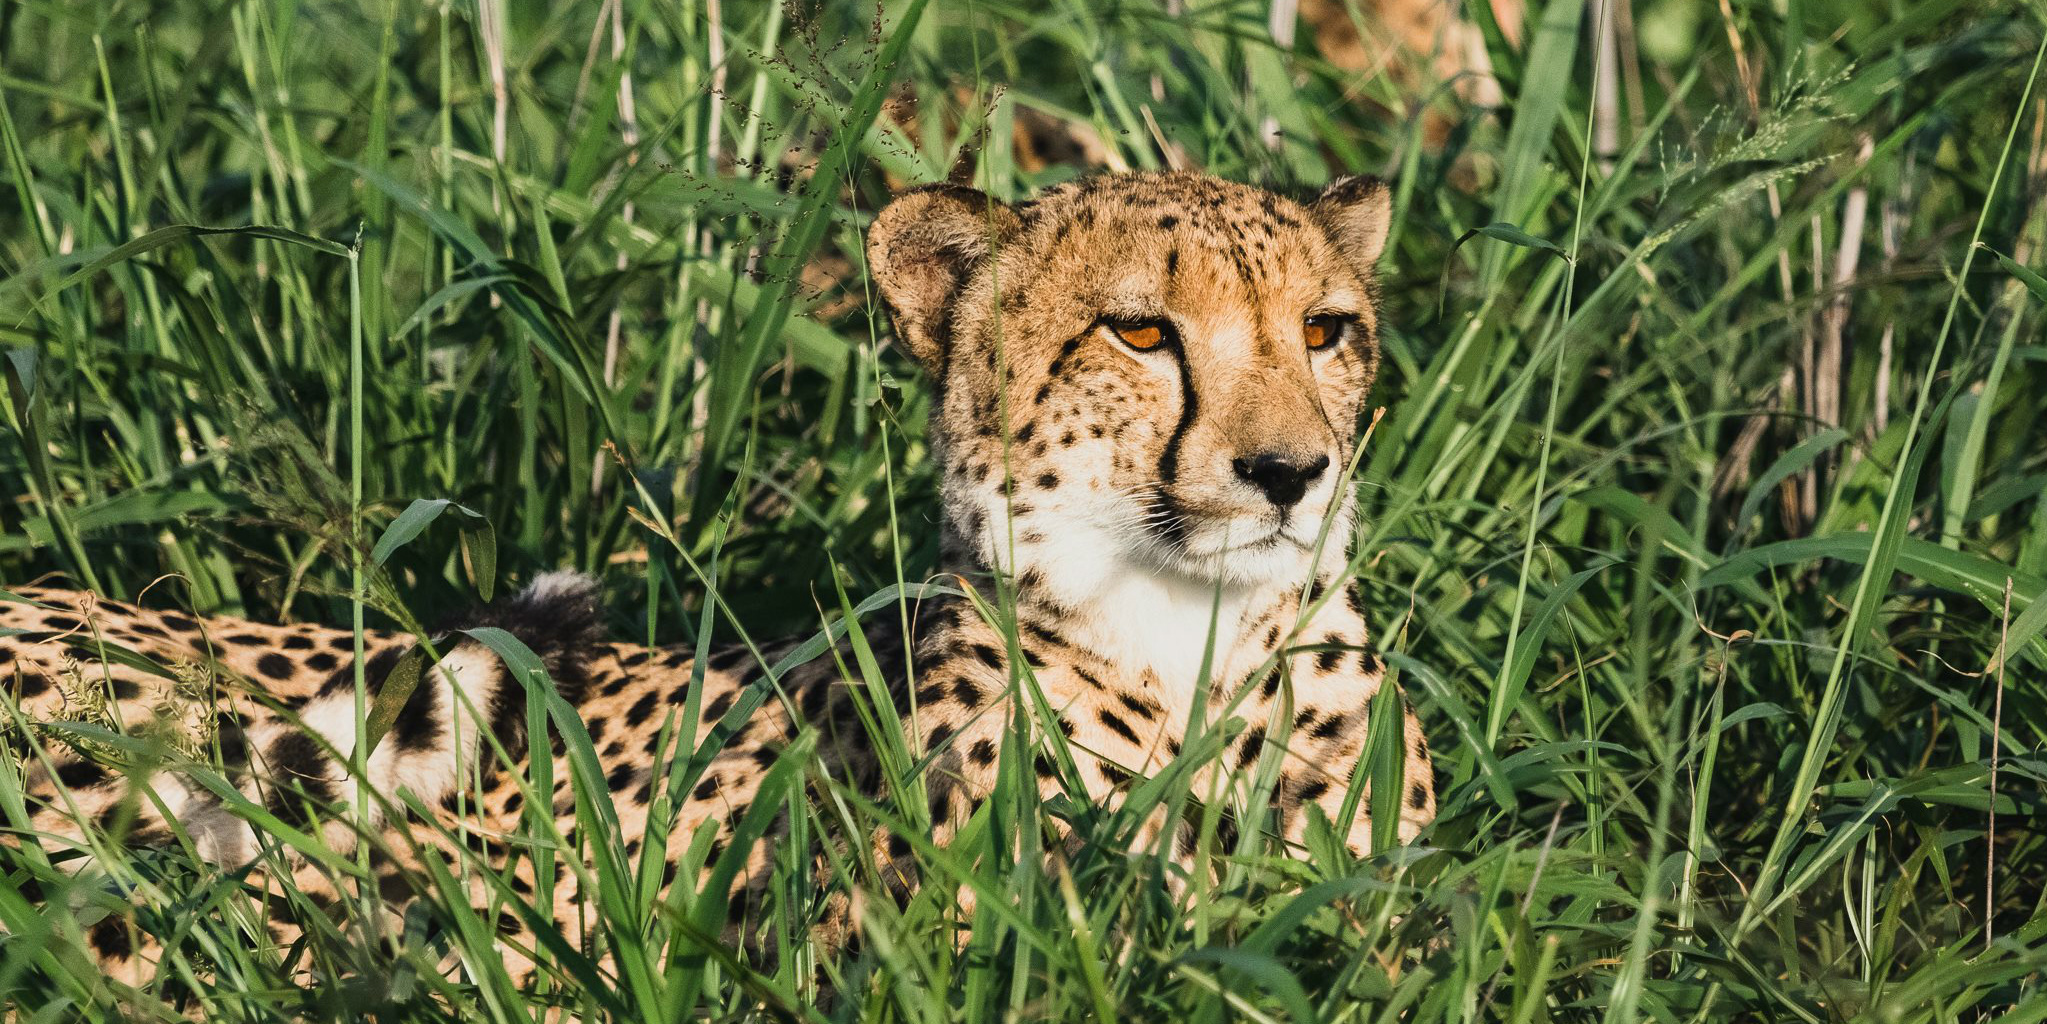 A male cheetah peers through tall grasses. This is one of the big cats being monitored by GVI in the cheetah conservation program.